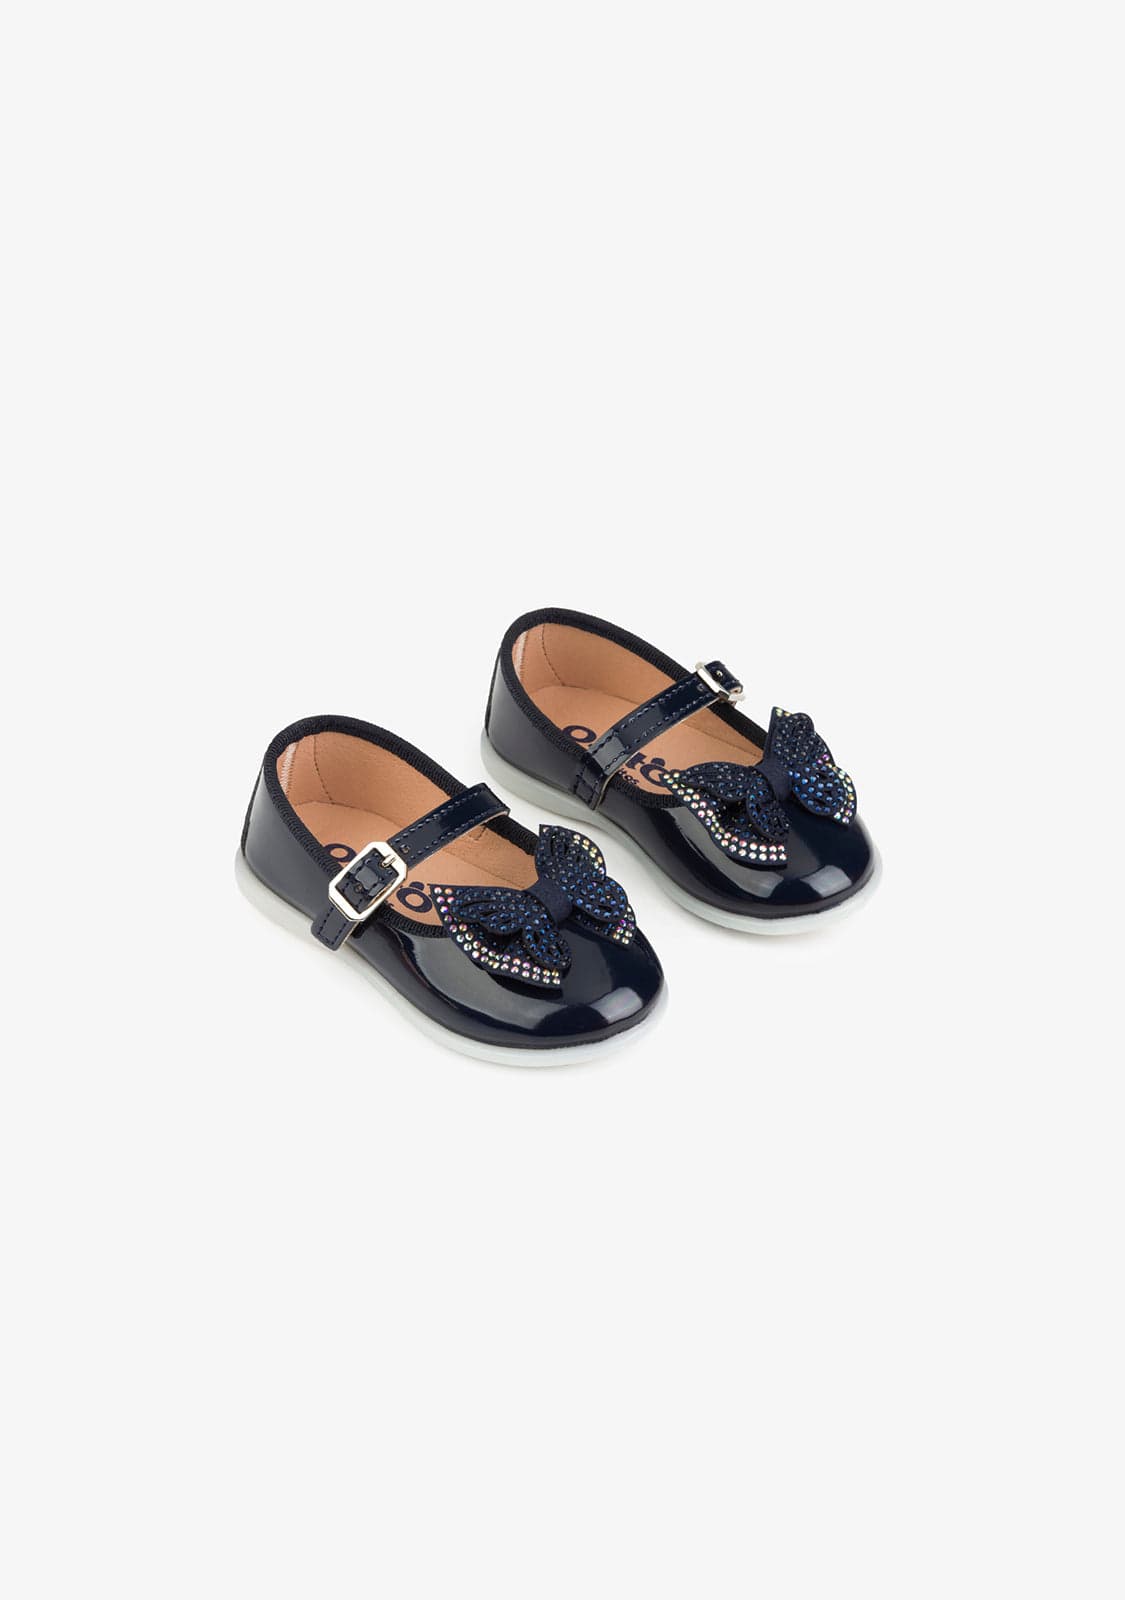 OSITO Shoes Baby's Navy Strass Bow Mary Janes